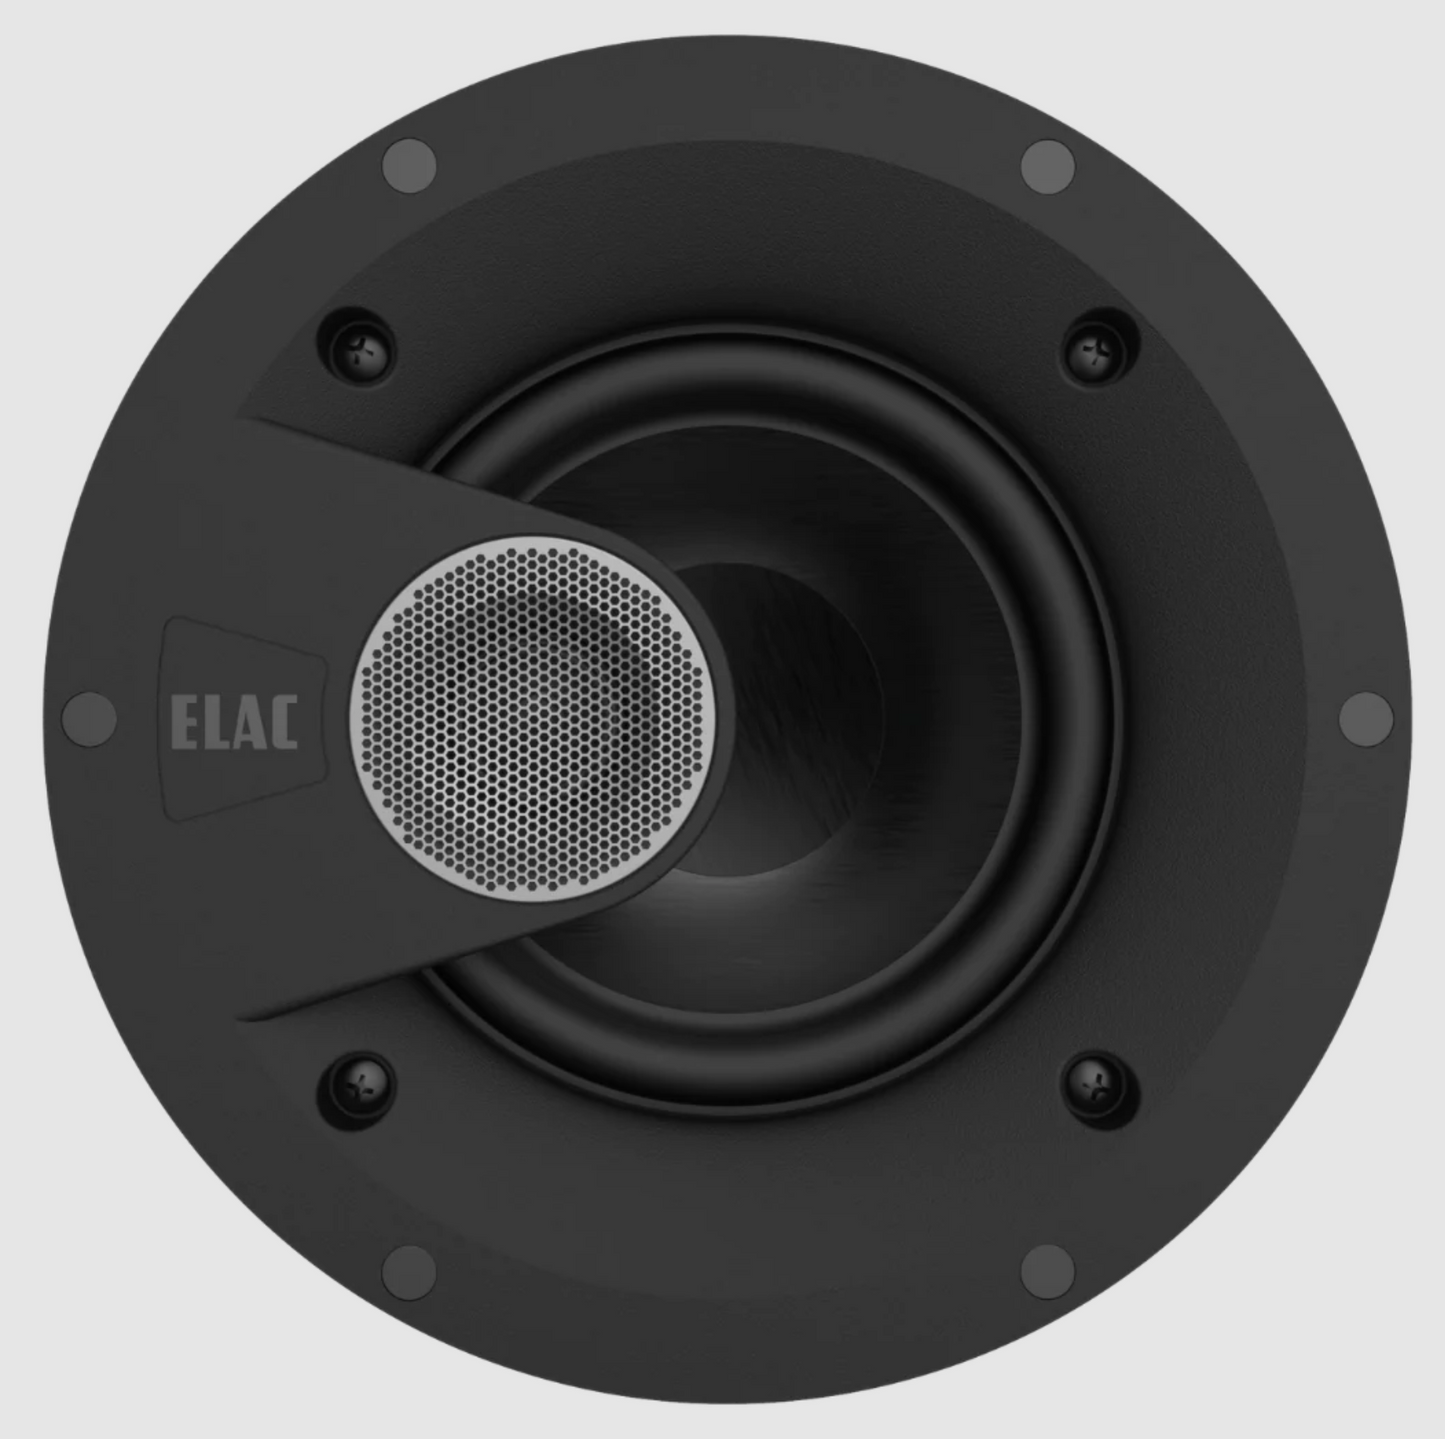 ELAC Vertex IC-V82-W 8 Inch In-Ceiling Speaker. Front face image